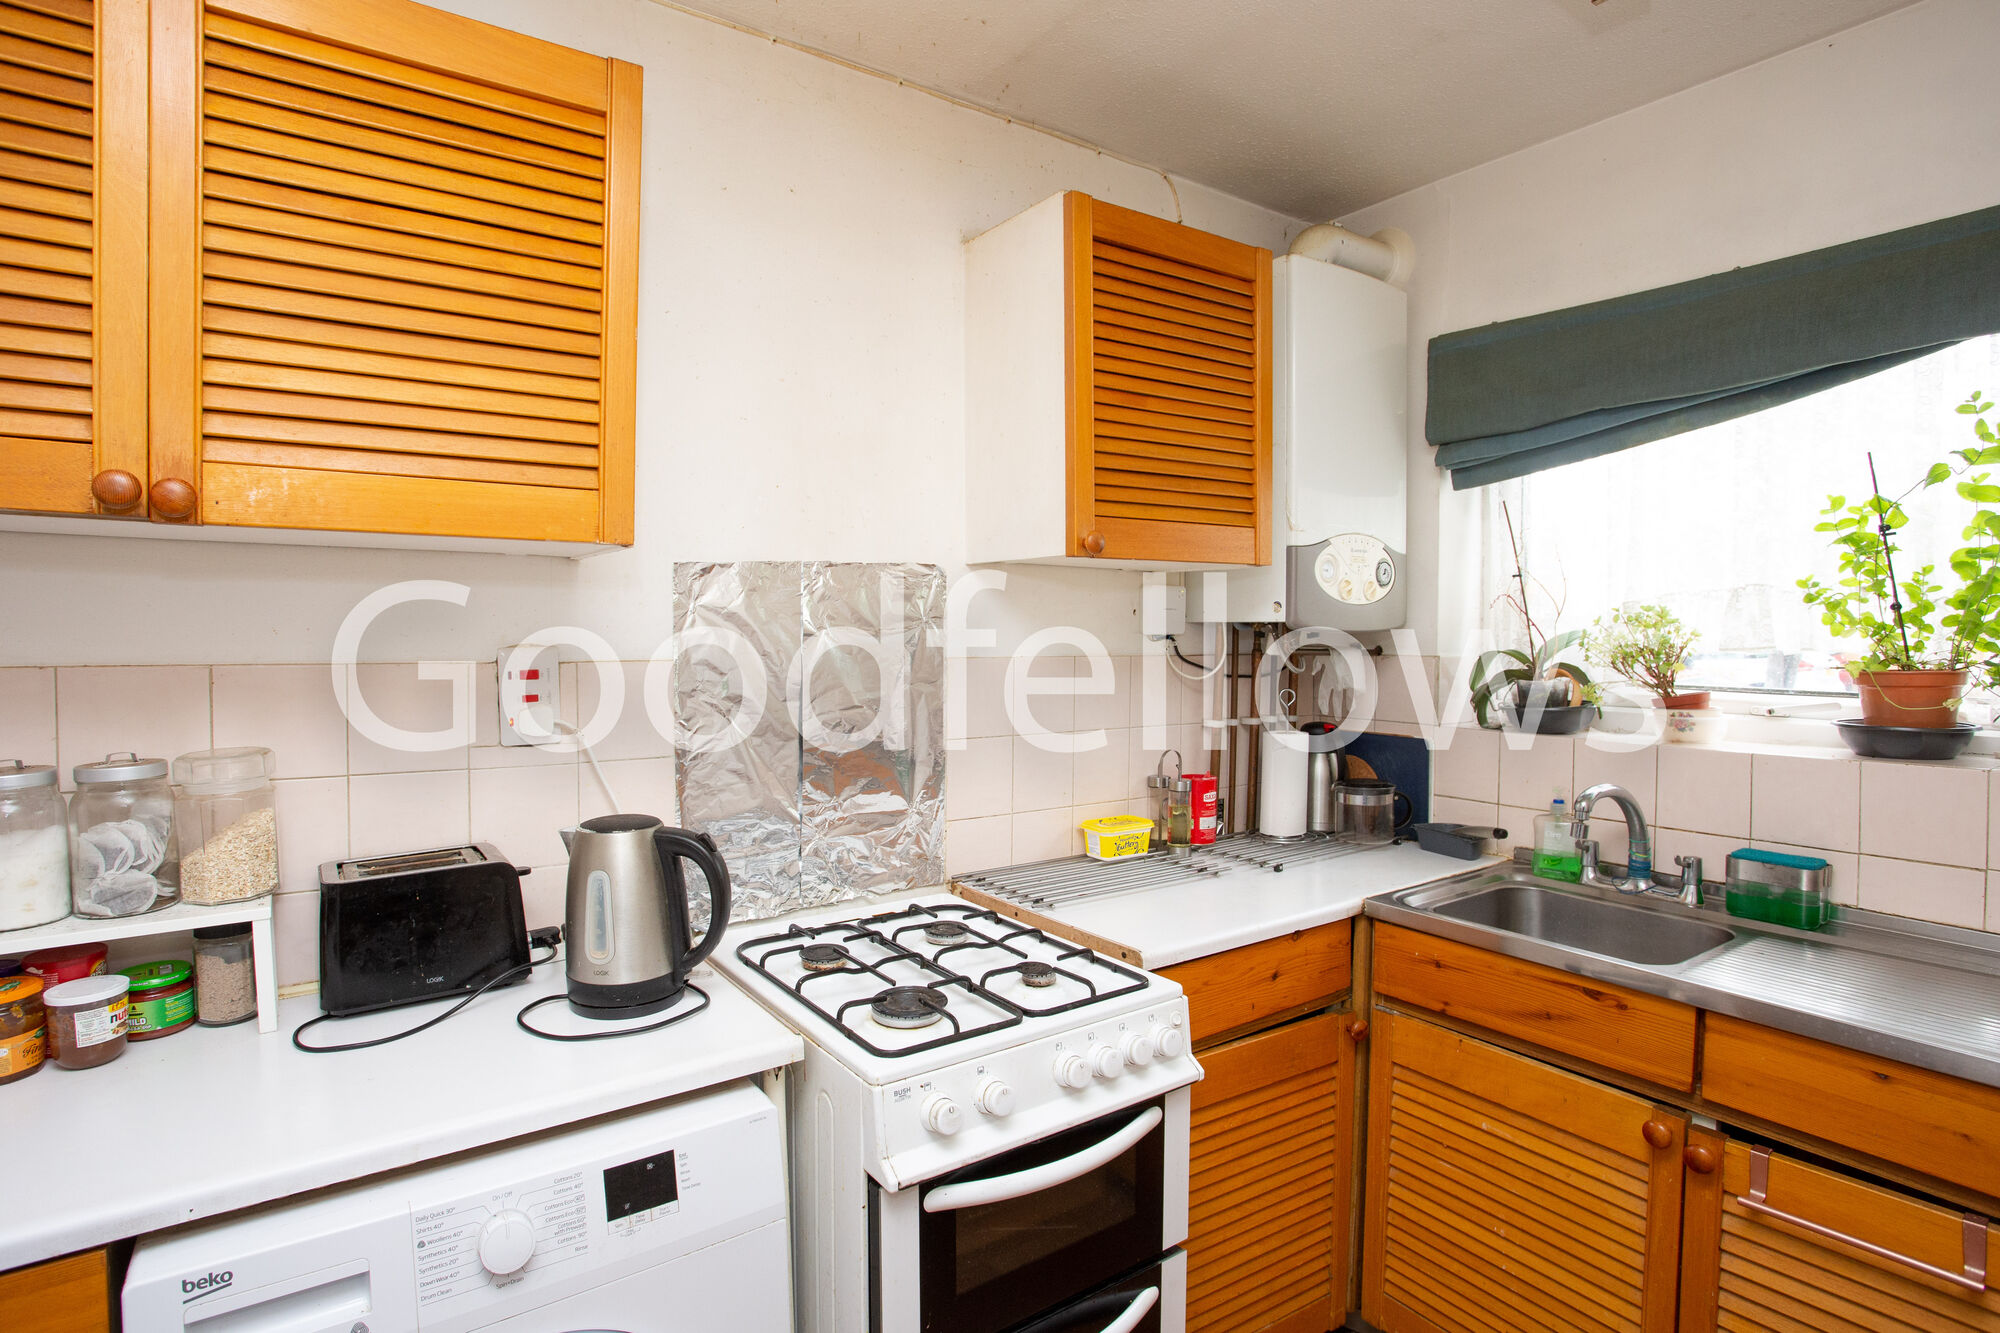 2 bedroom  house to rent, Available from 07/03/2024 Willmore End, Merton, SW19, main image